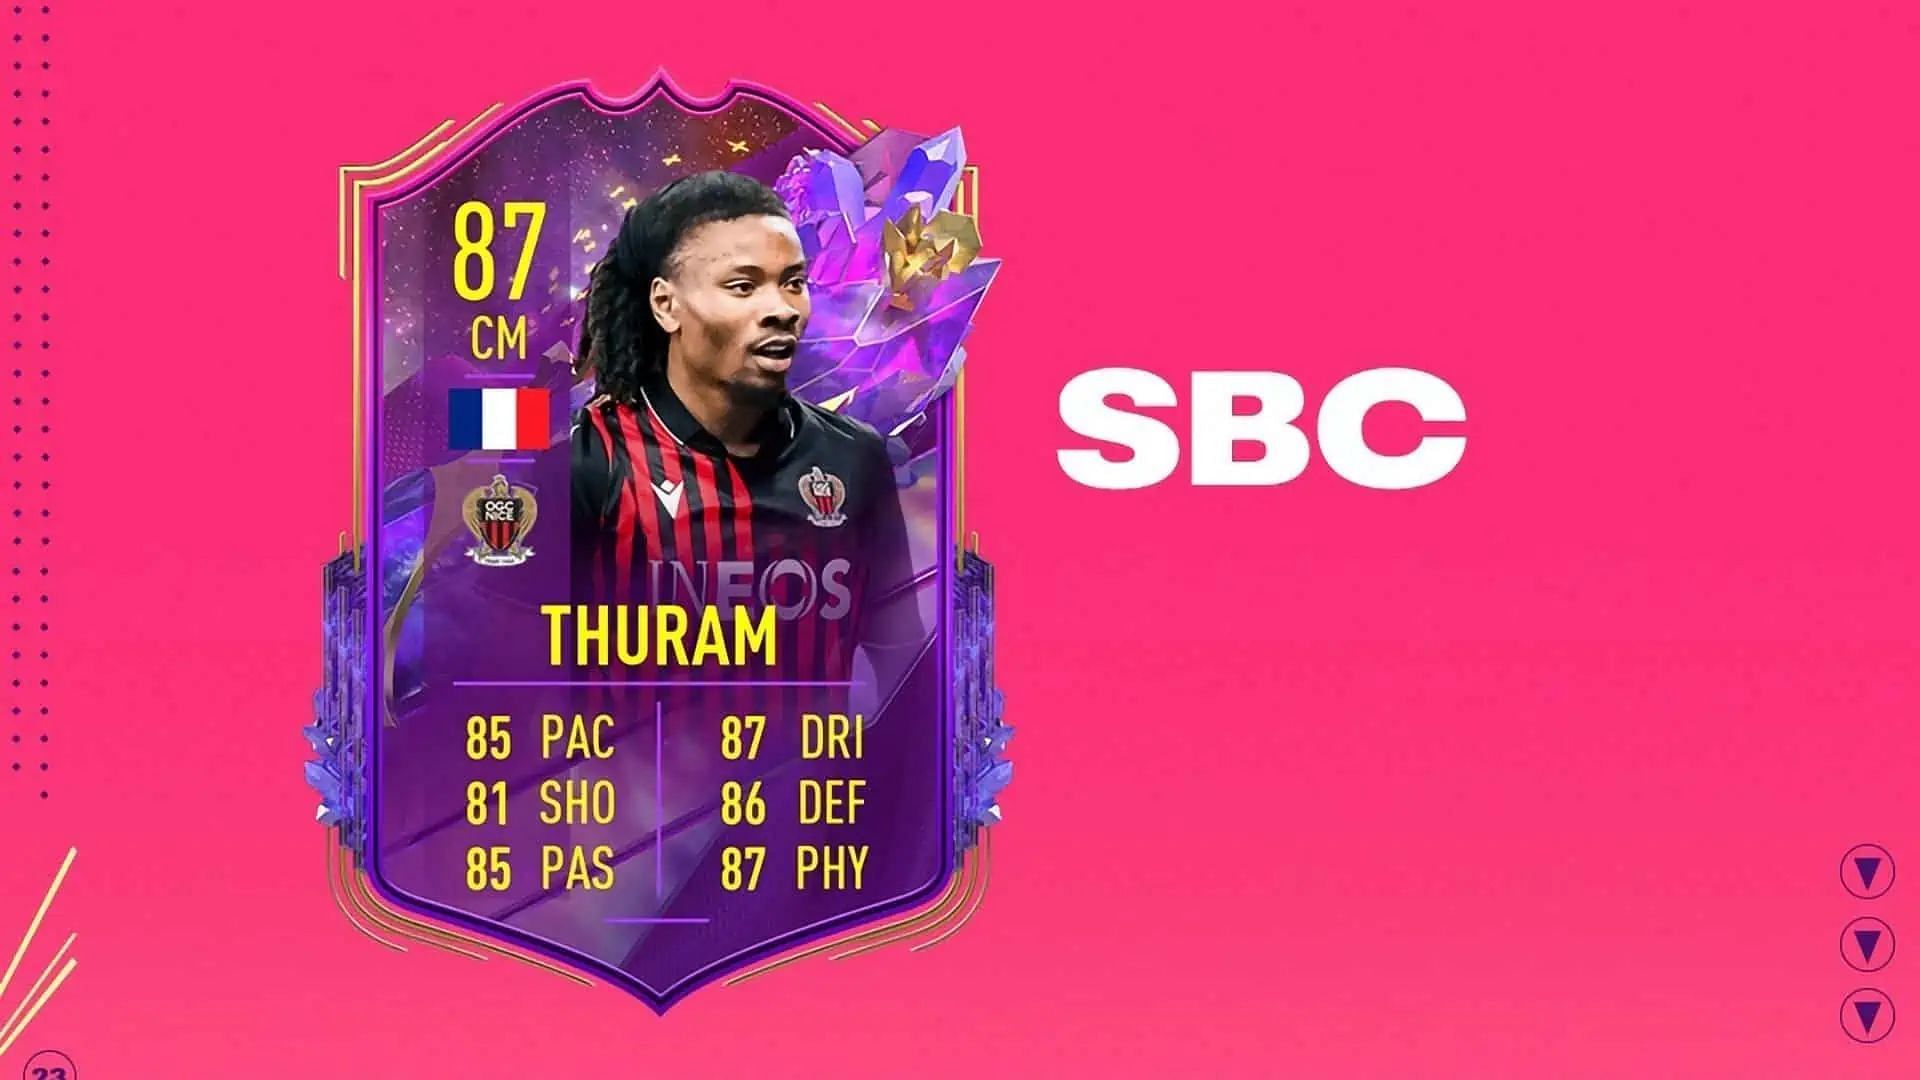 FIFA 23 players can take advantage of the Khephren Thuram Future Stars SBC to get a promo card for their Ultimate Team squads (Image via EA Sports)